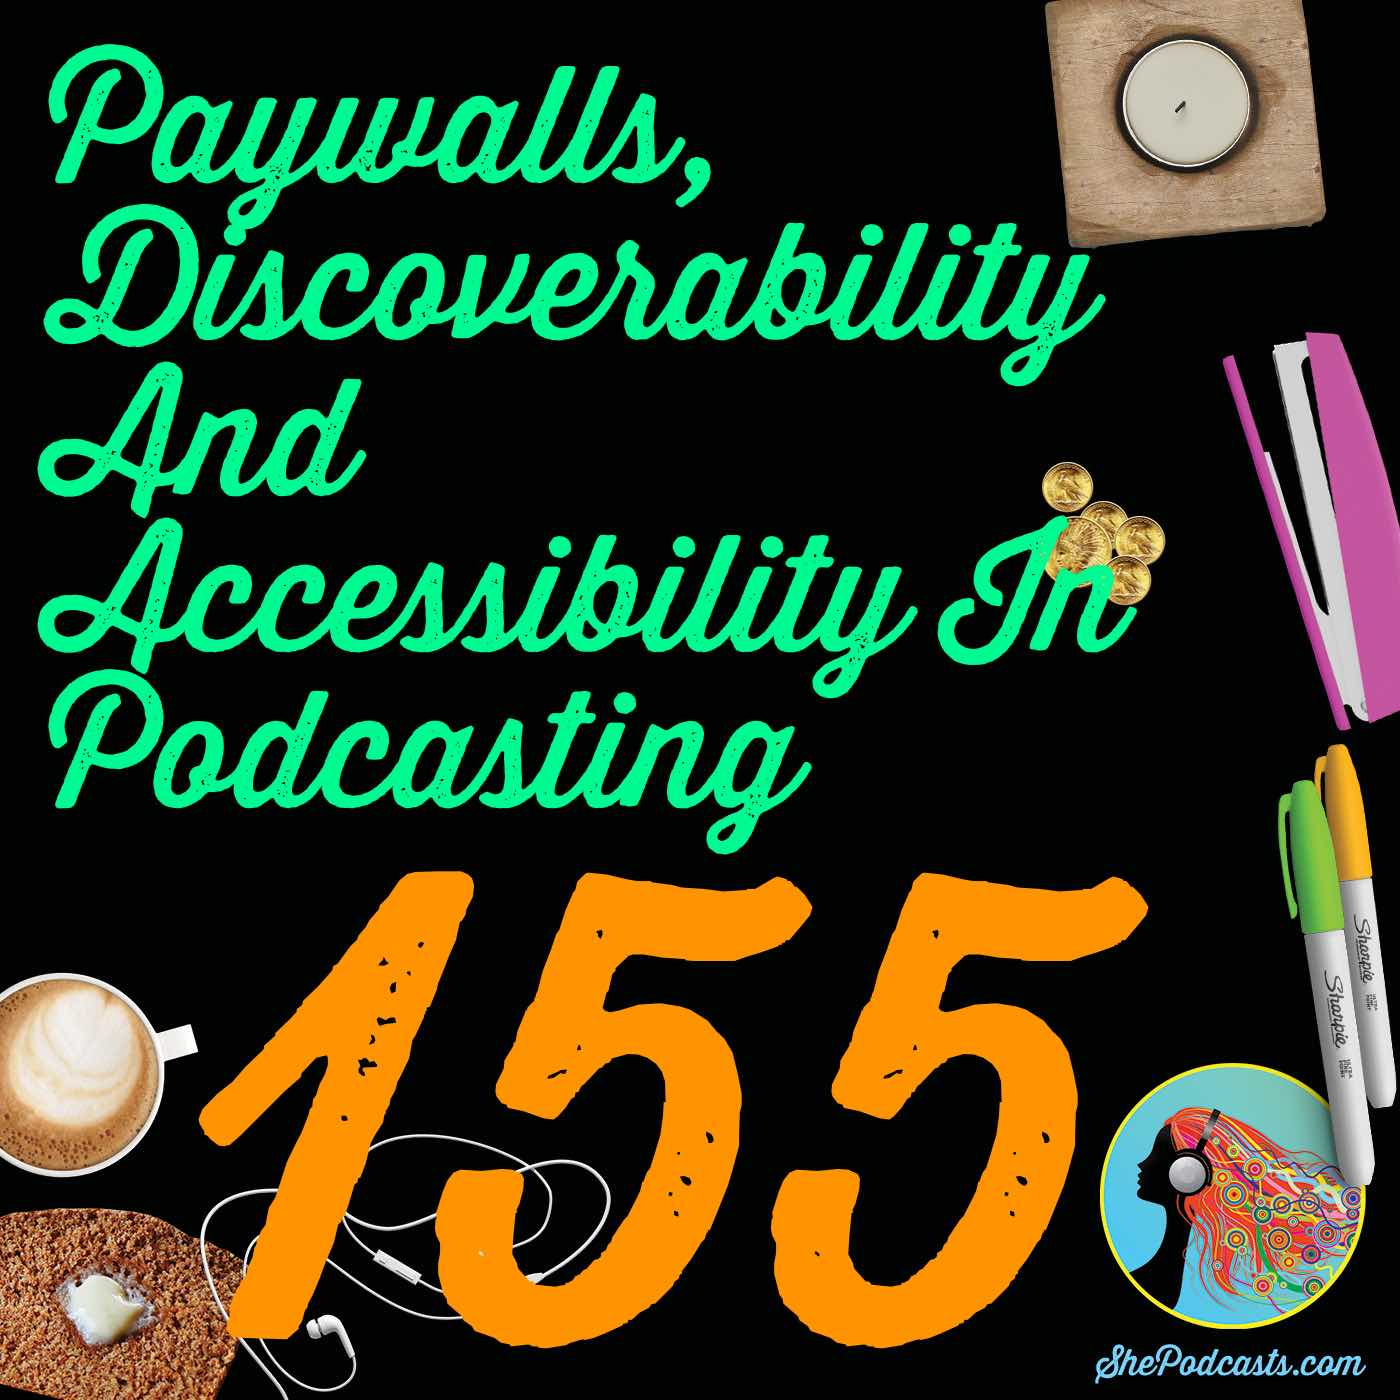 155 Paywalls, Discoverability And Accessibility In Podcasting